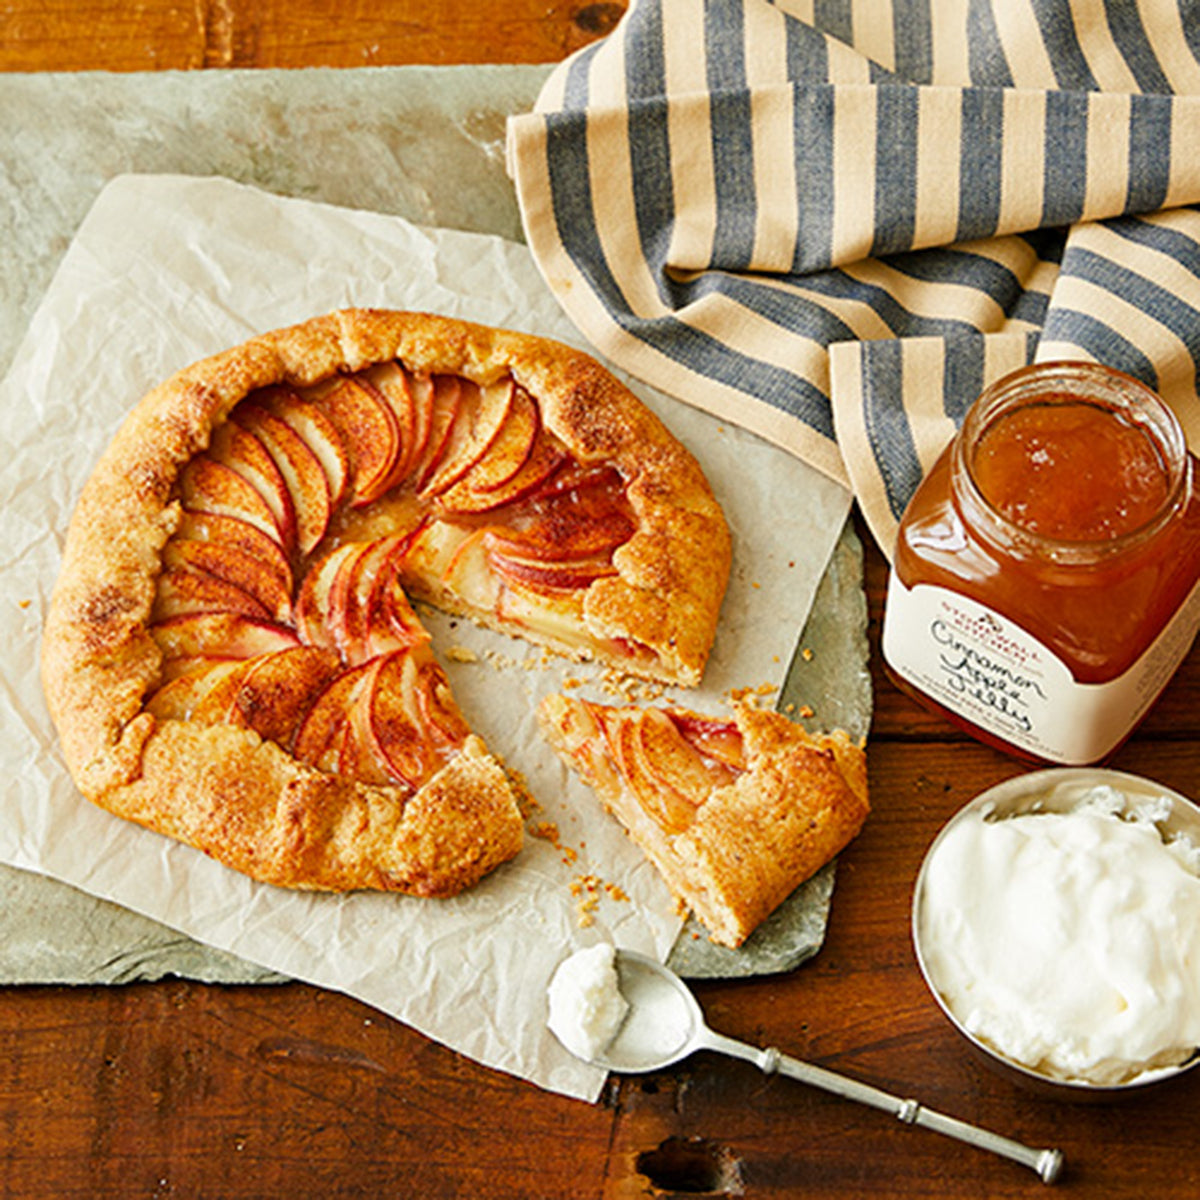 Cinnamon apple galette made with Stonewall Kitchen Cinnamon apple jelly